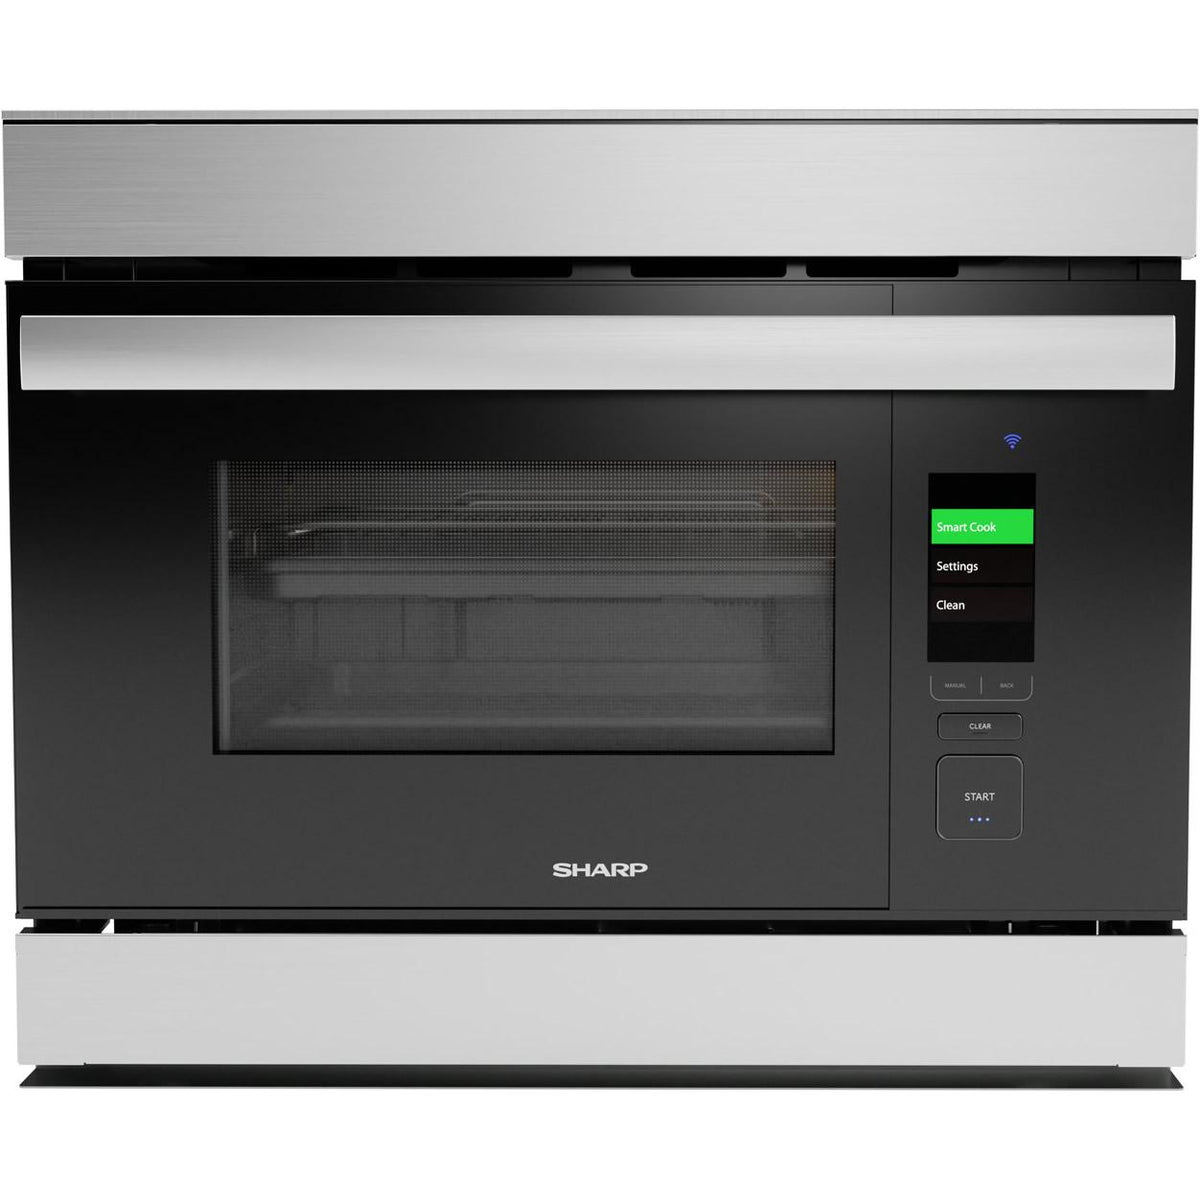 24-inch, 1.1 cu. ft. Built-in Combination Wall Oven with Convection SSC2489GS IMAGE 1